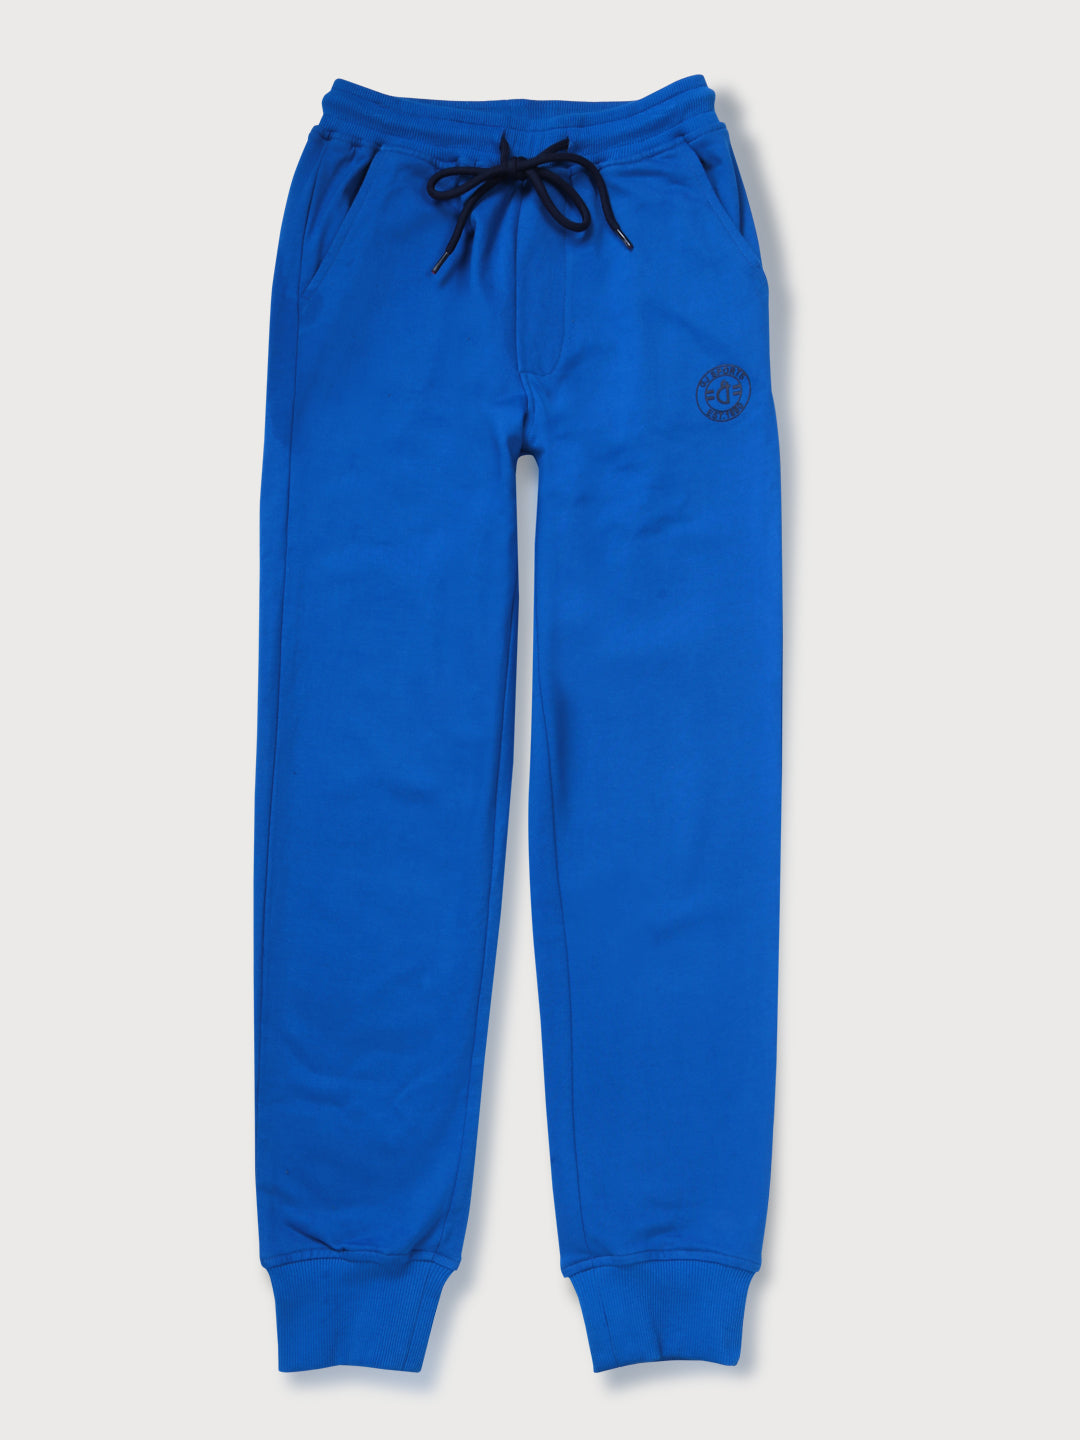 Boys Blue Solid Knits Track Pant